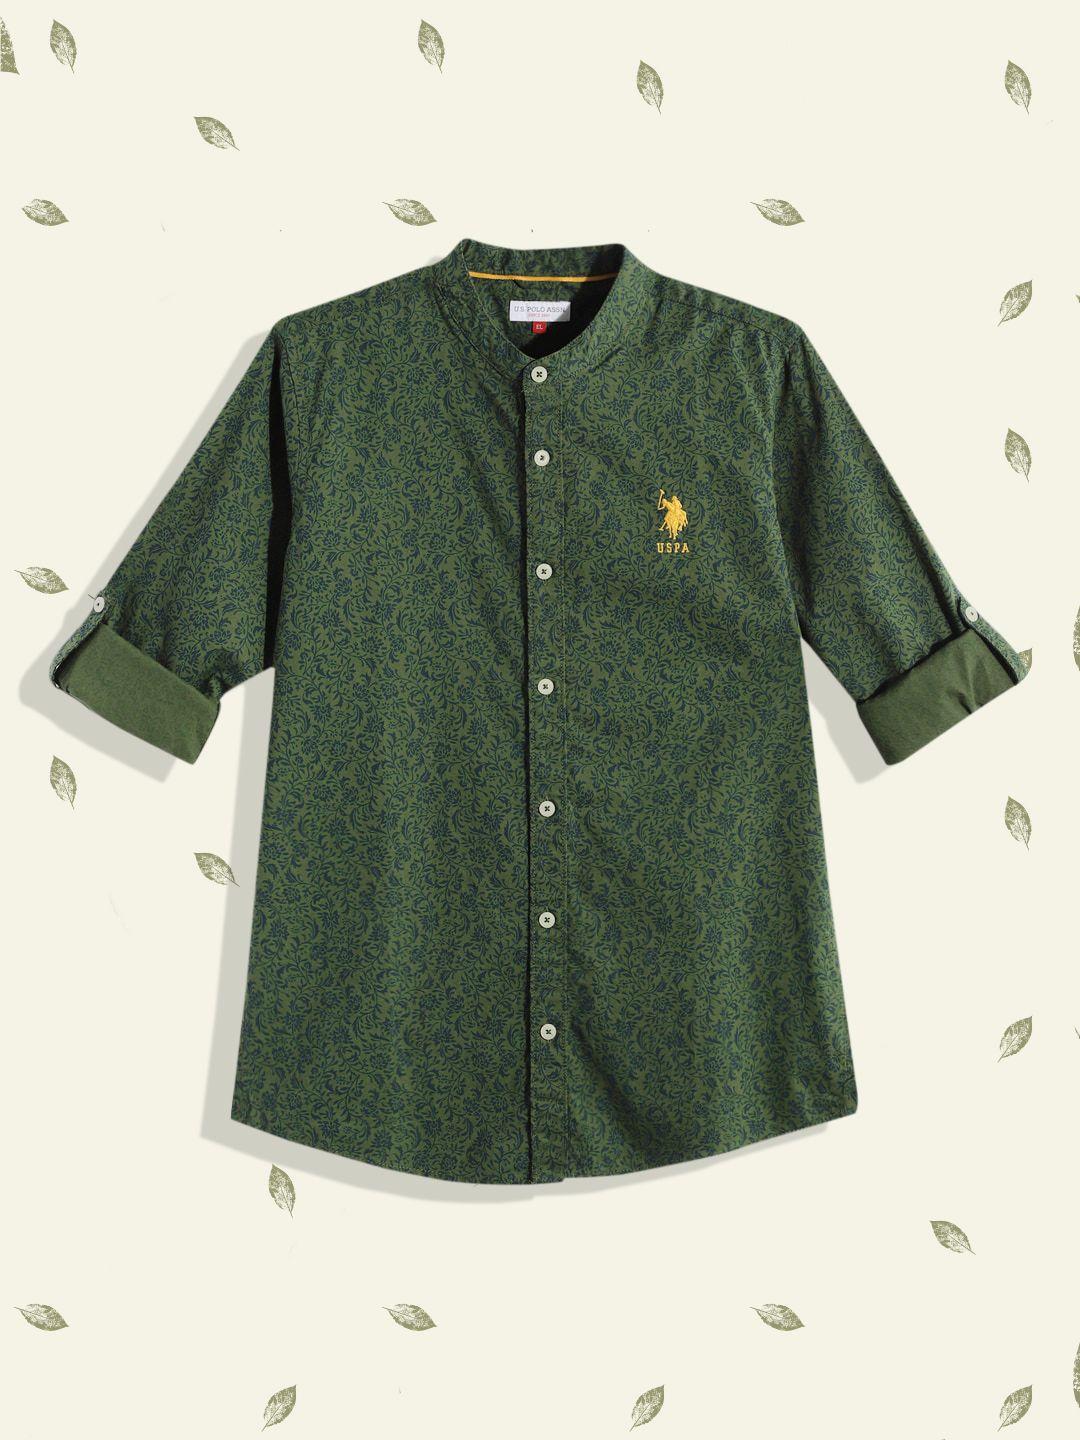 u.s. polo assn. kids boys olive green printed pure cotton casual shirt